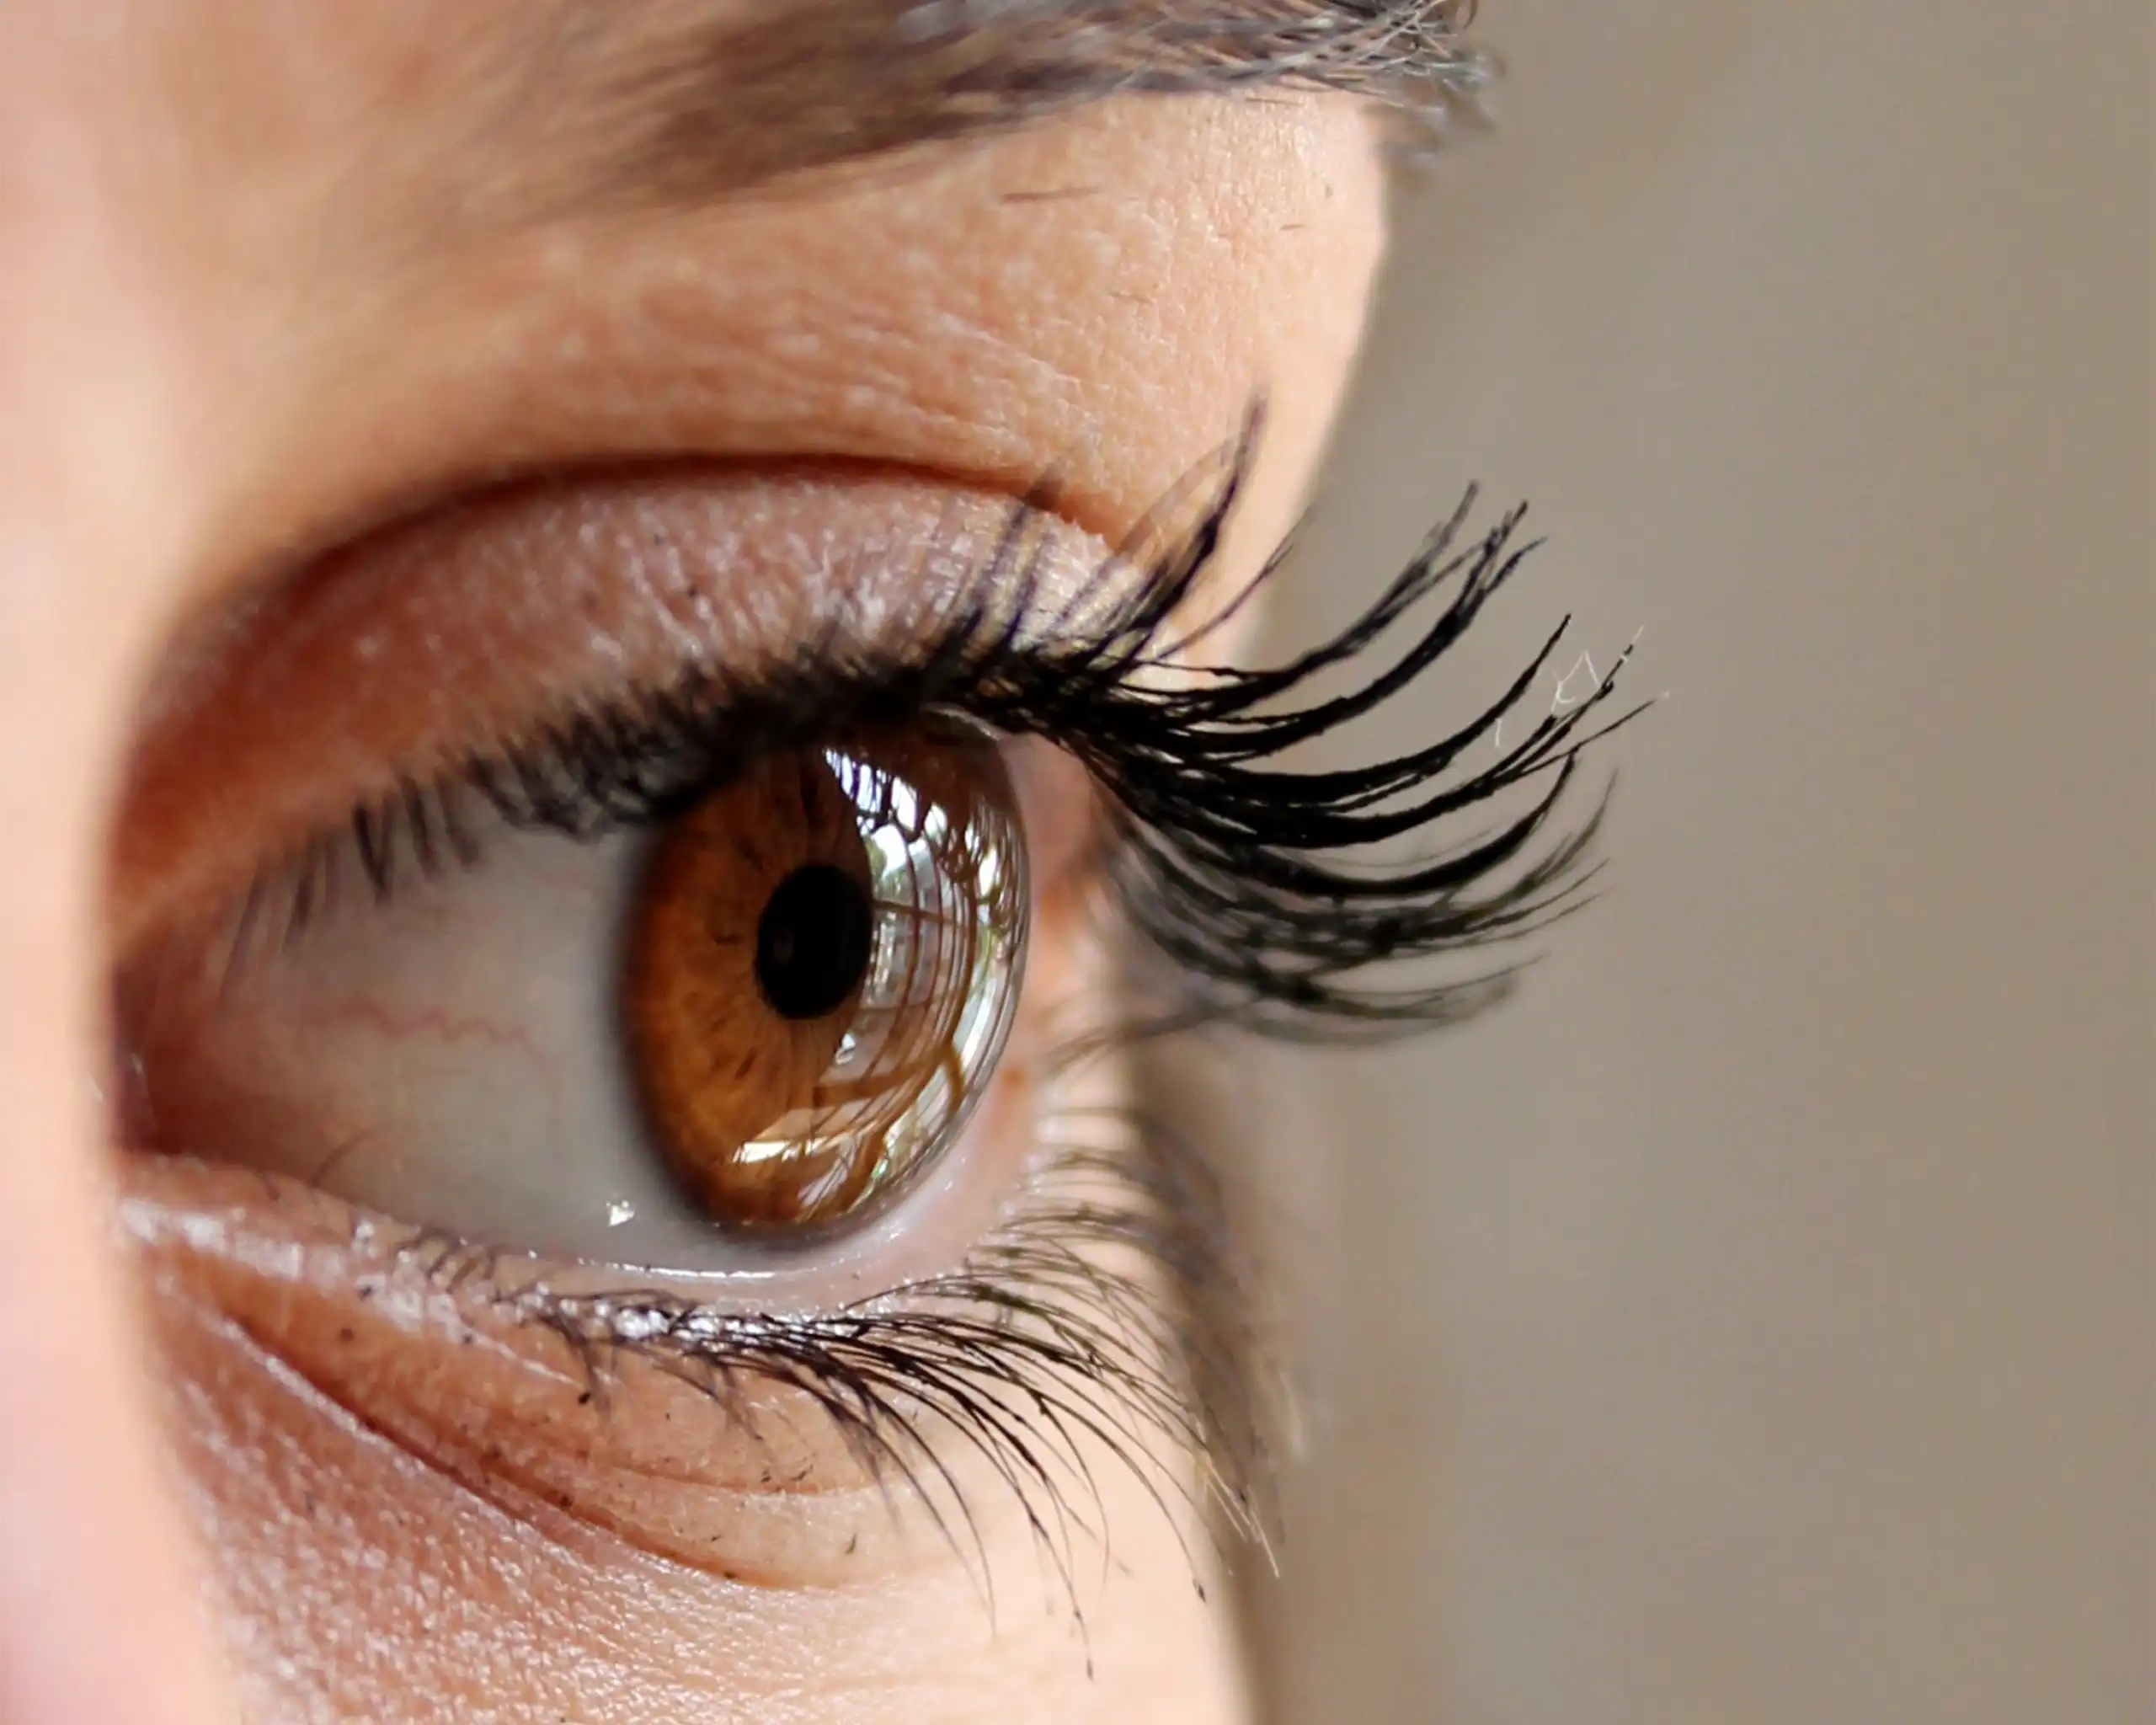 A close up of a person's eyes, with long lashes, brown eyes, and an arched eyebrow.